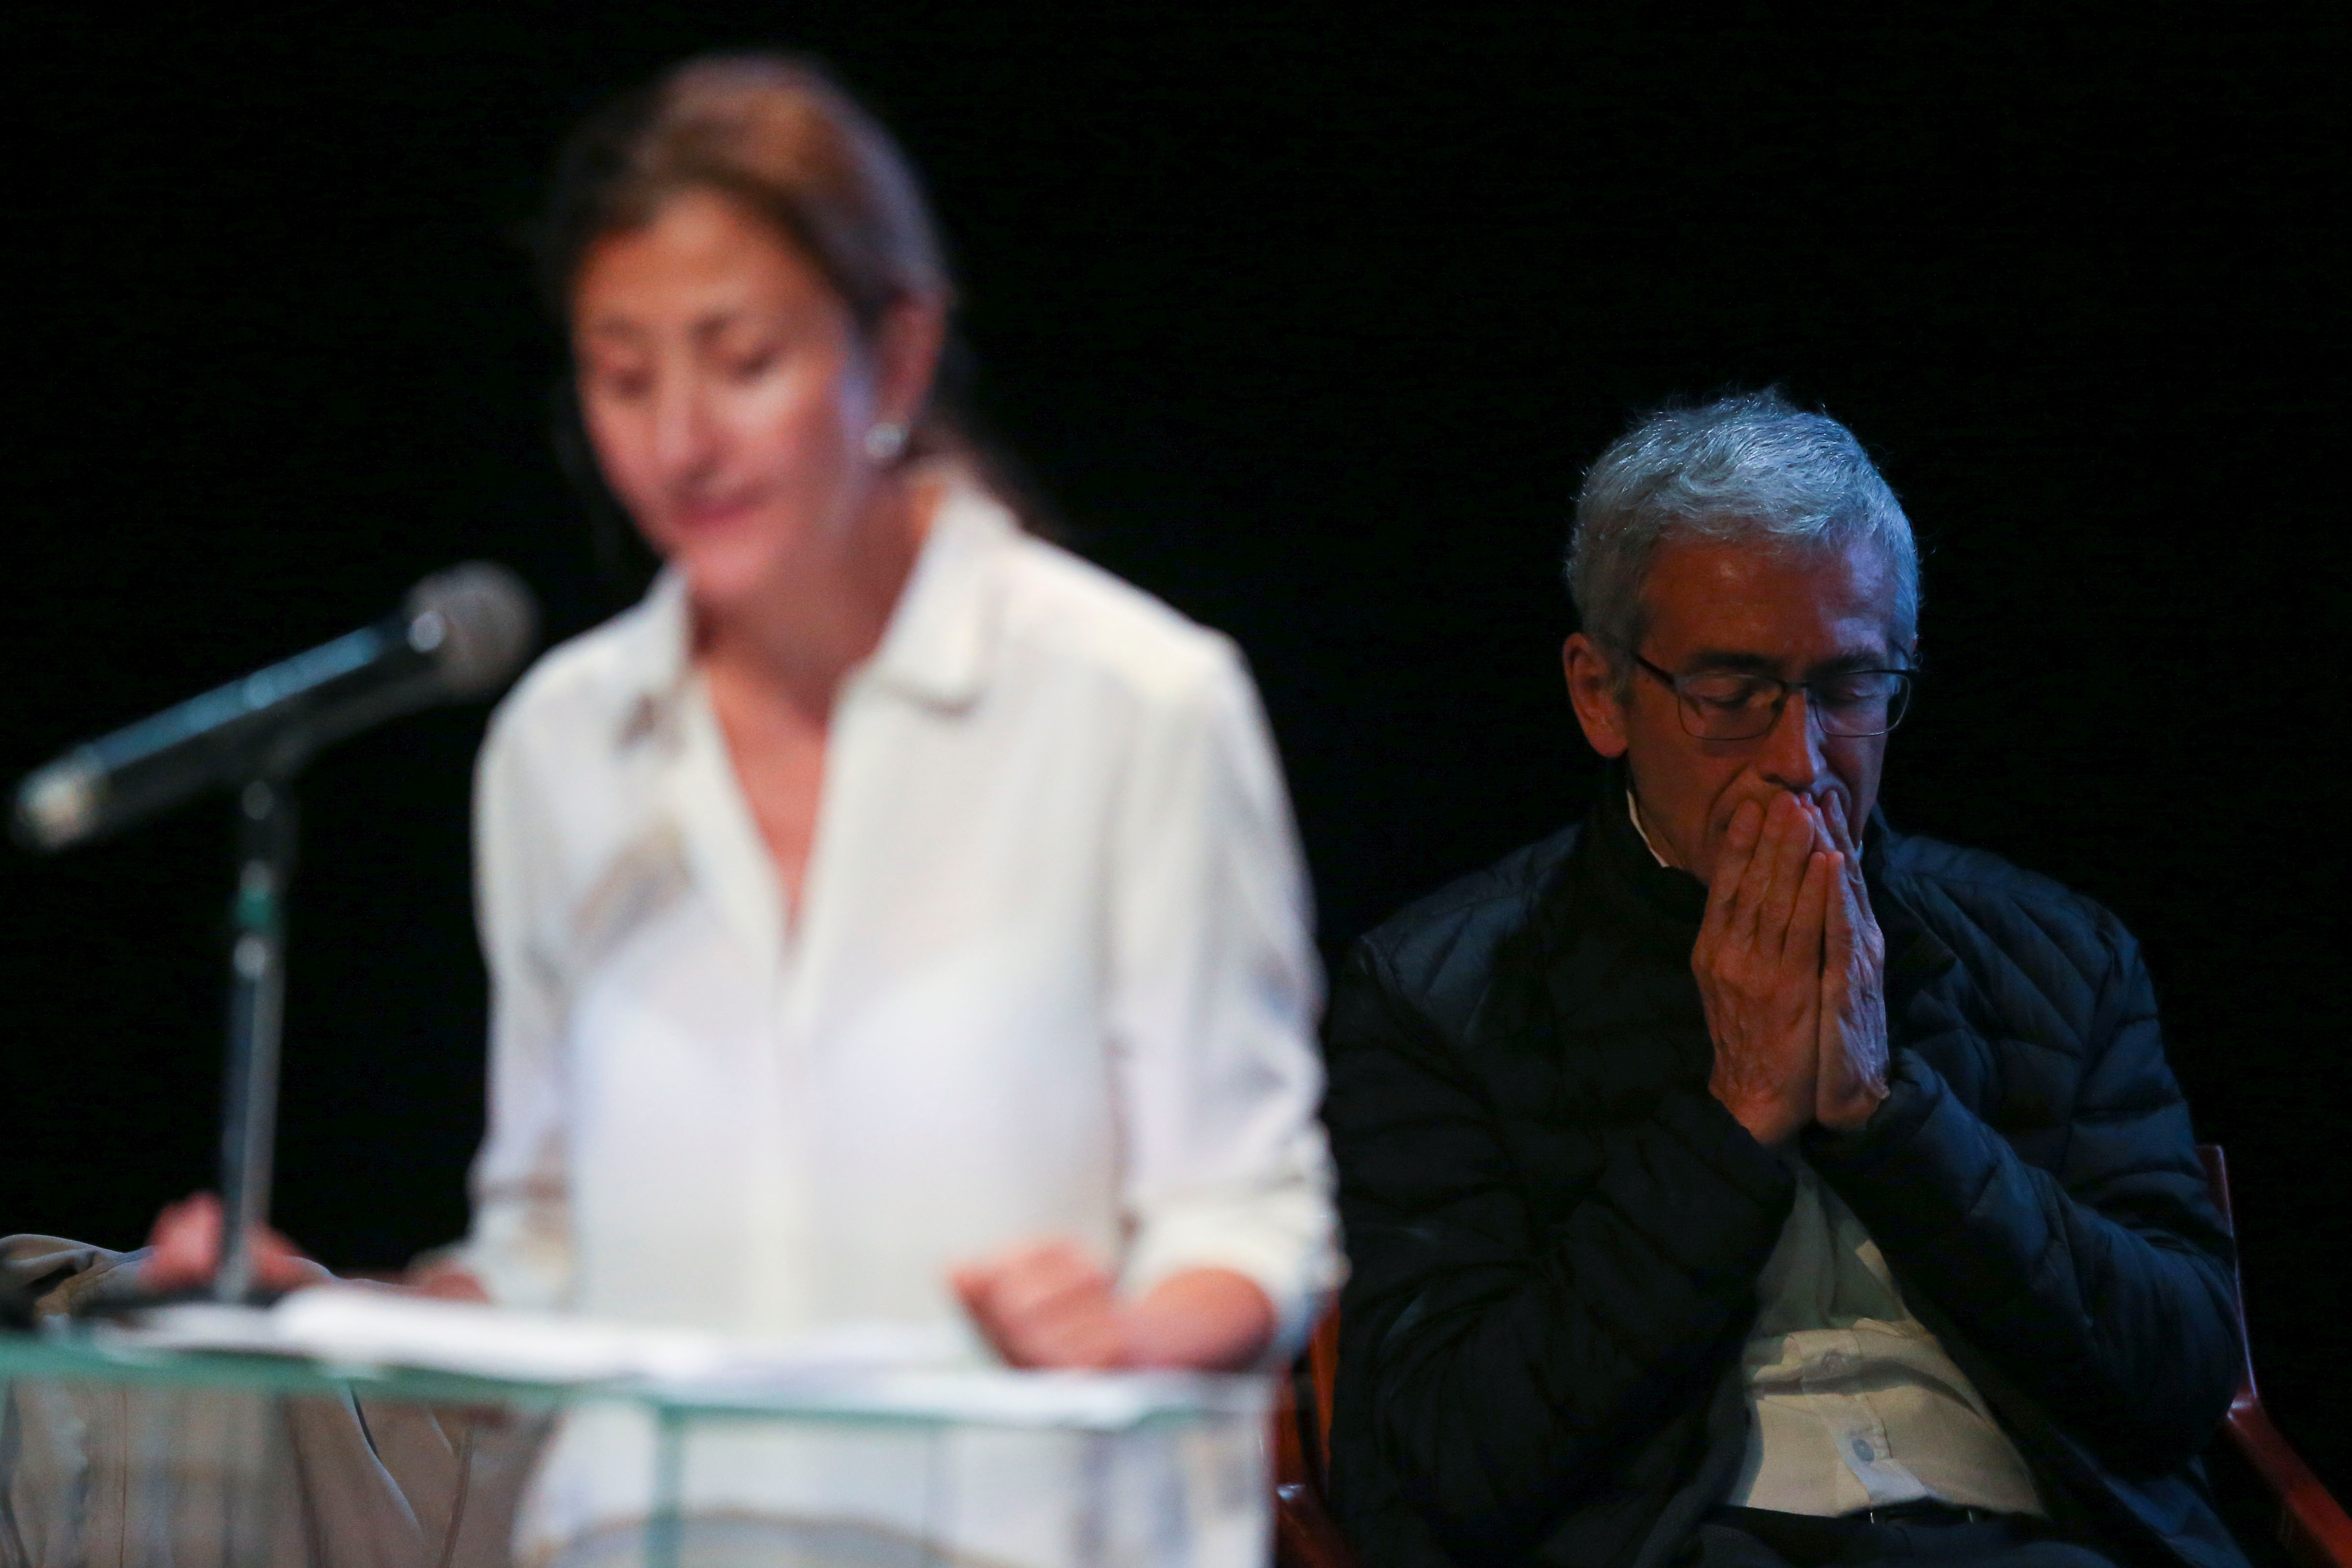 Francisco de Roux, President of the Truth Commission, reacts as he listens Ingrid Betancourt, French-Colombian politician and former FARC hostage, during an act of recognition with the participation of her kidnappers and their now political party Comunes, in Bogota, Colombia June 23, 2021. REUTERS/Luisa Gonzalez